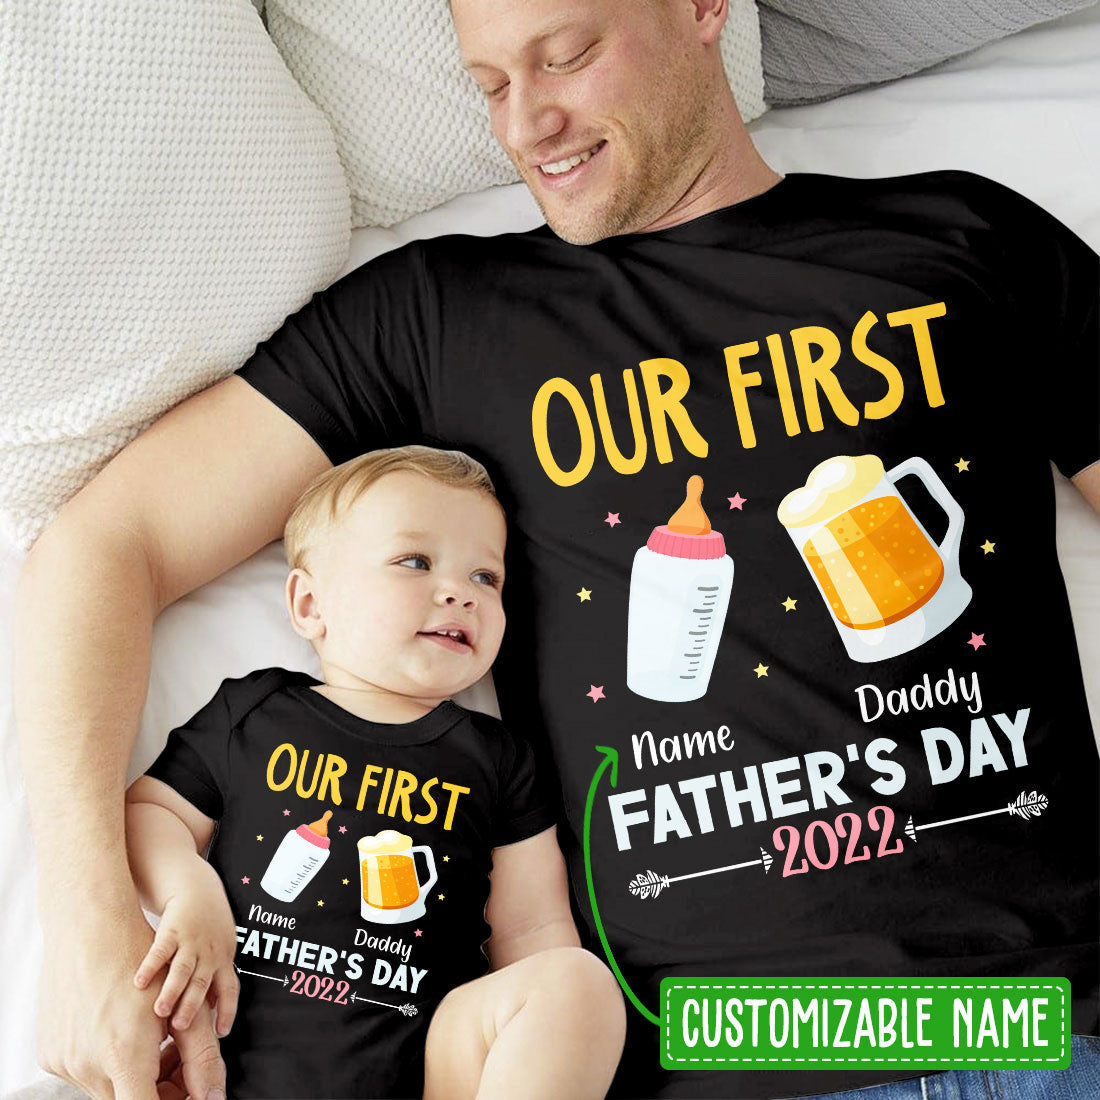 Our First Father's Day Family Gift Personalized Matching Shirt Onesie